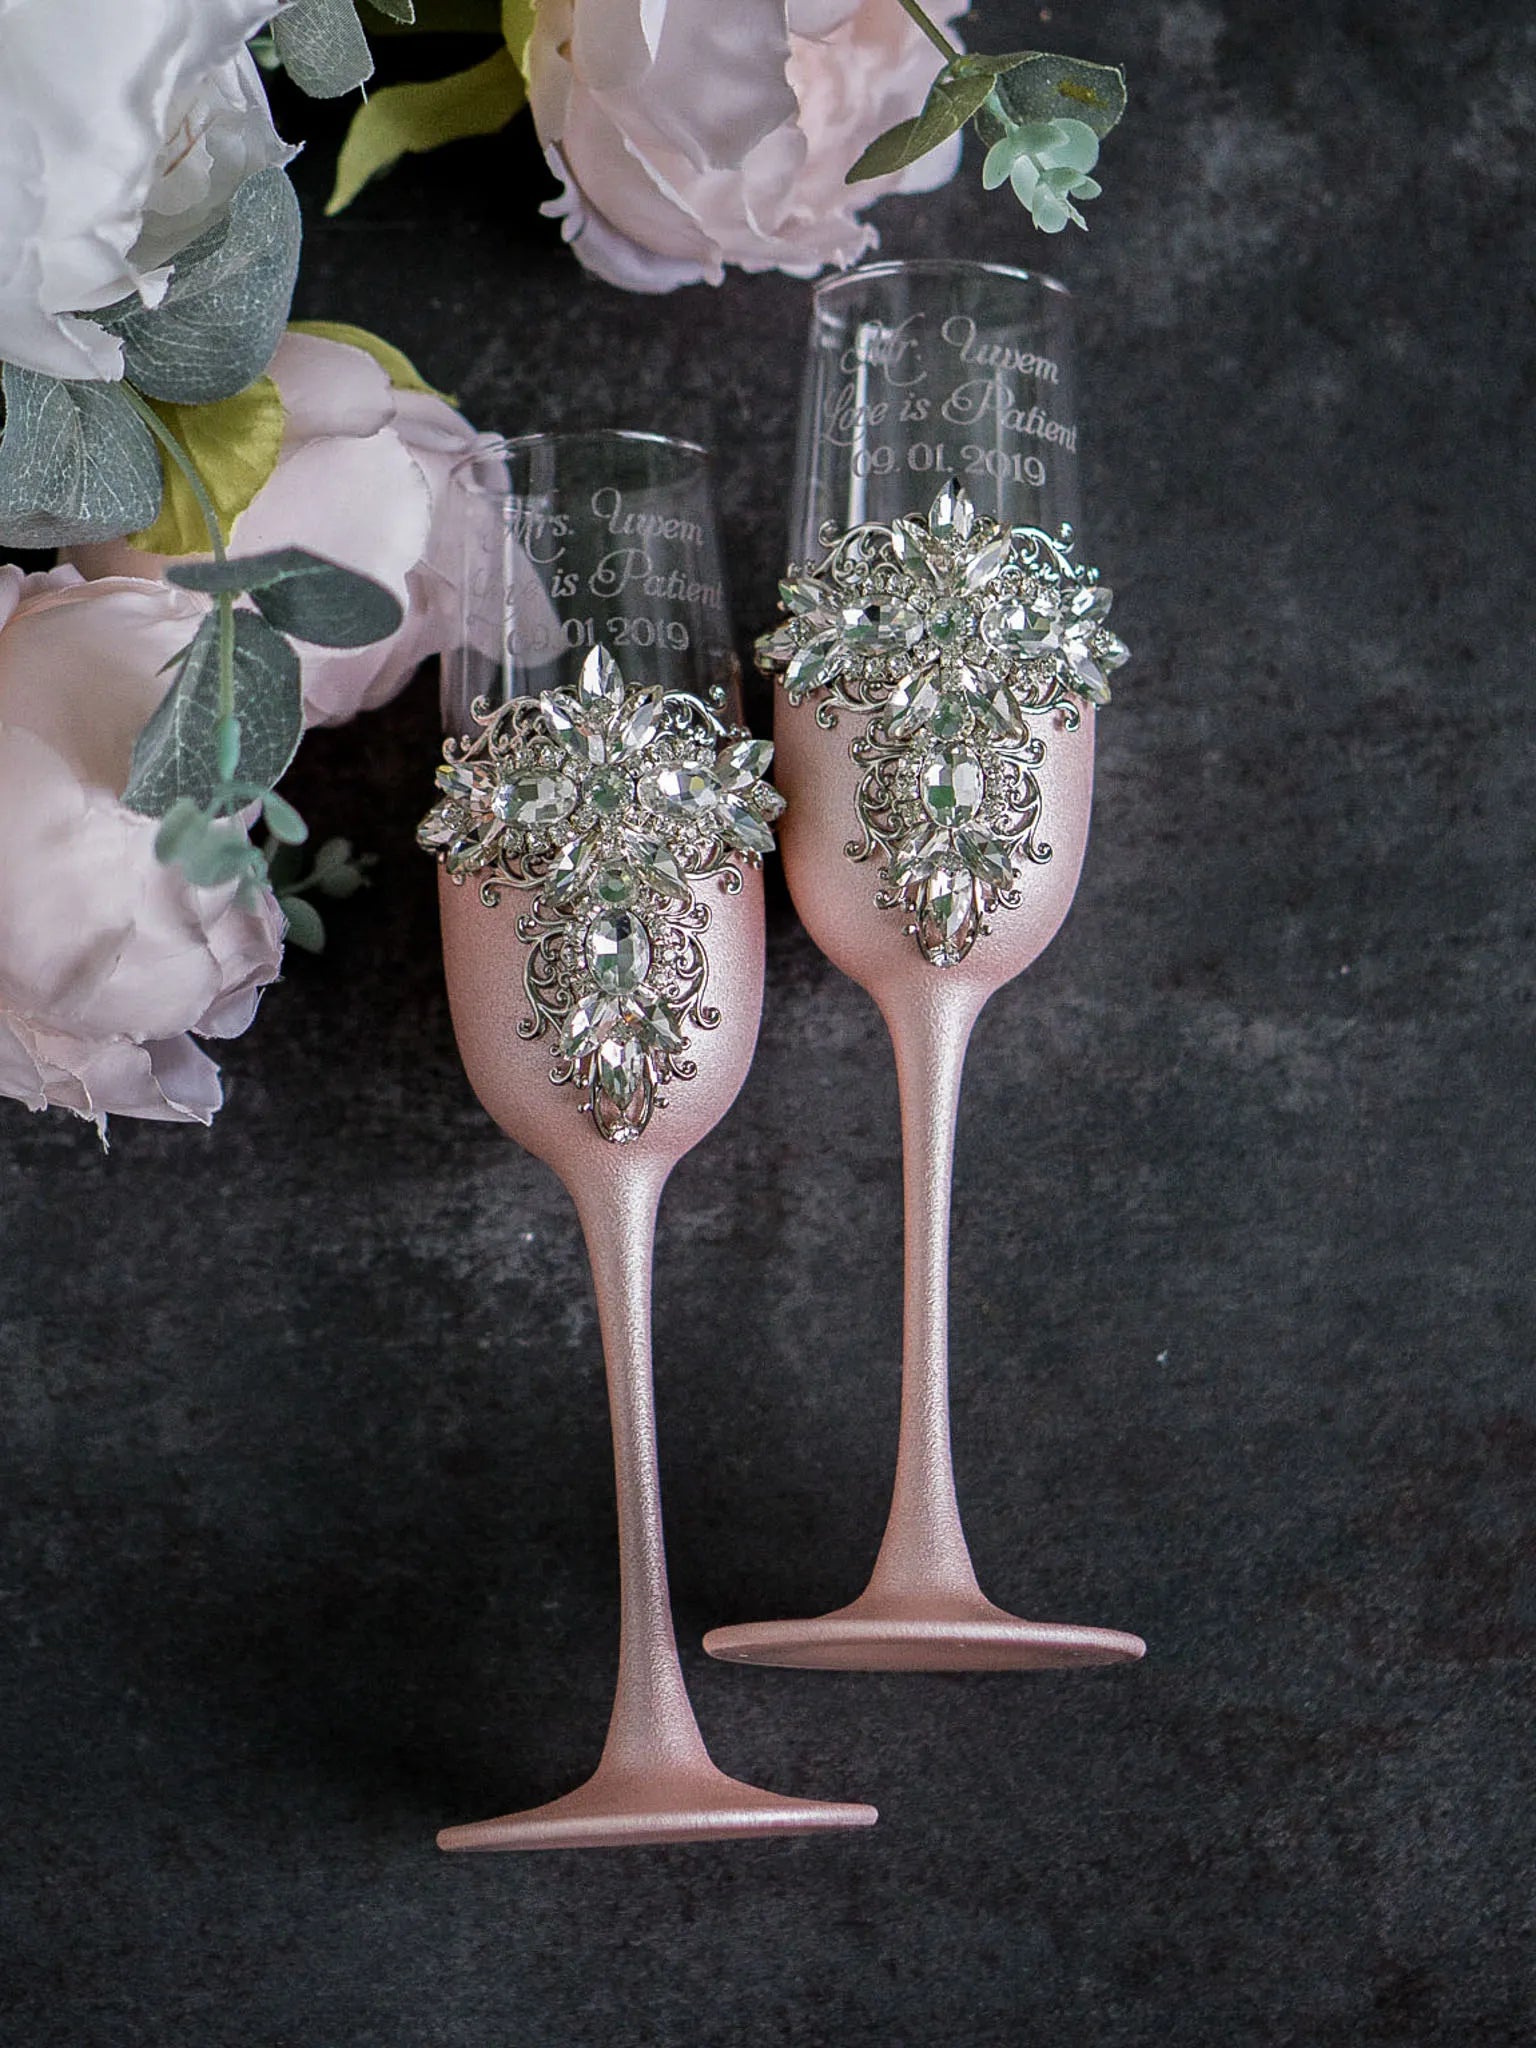 Exquisite wedding champagne flutes with crystal accents